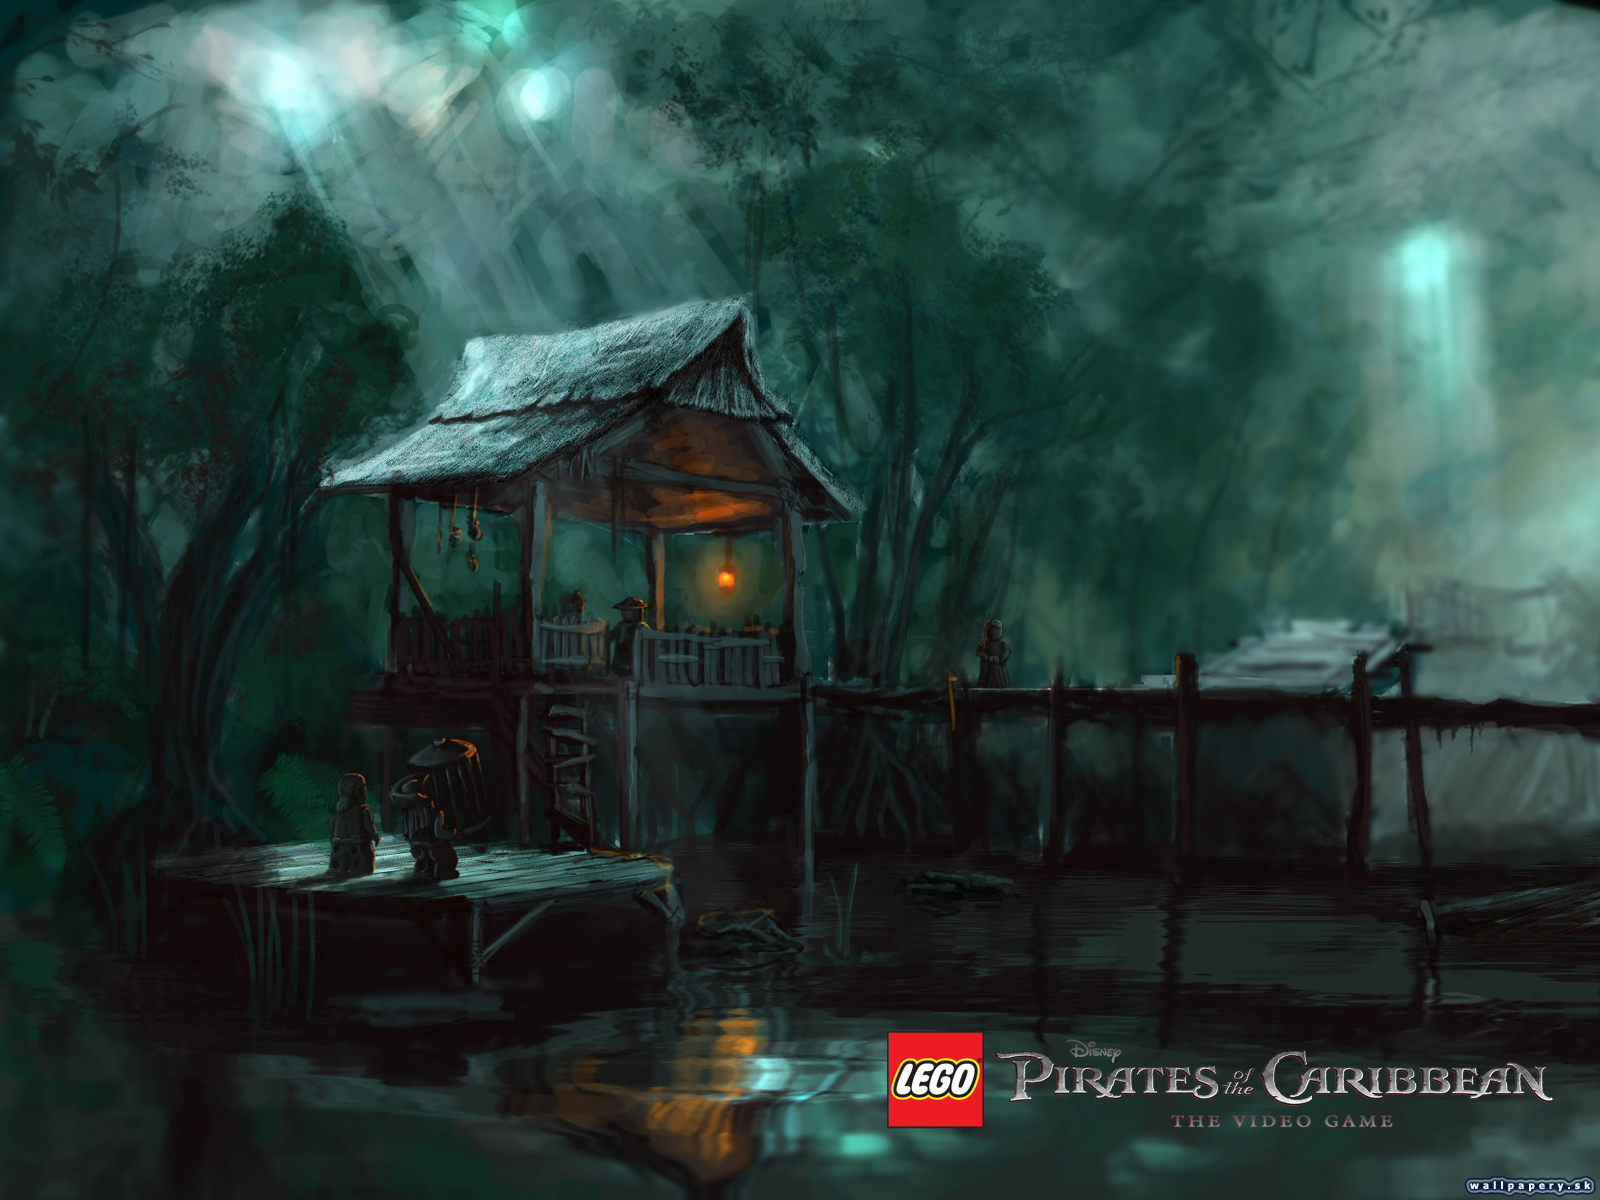 Lego Pirates of the Caribbean: The Video Game - wallpaper 2